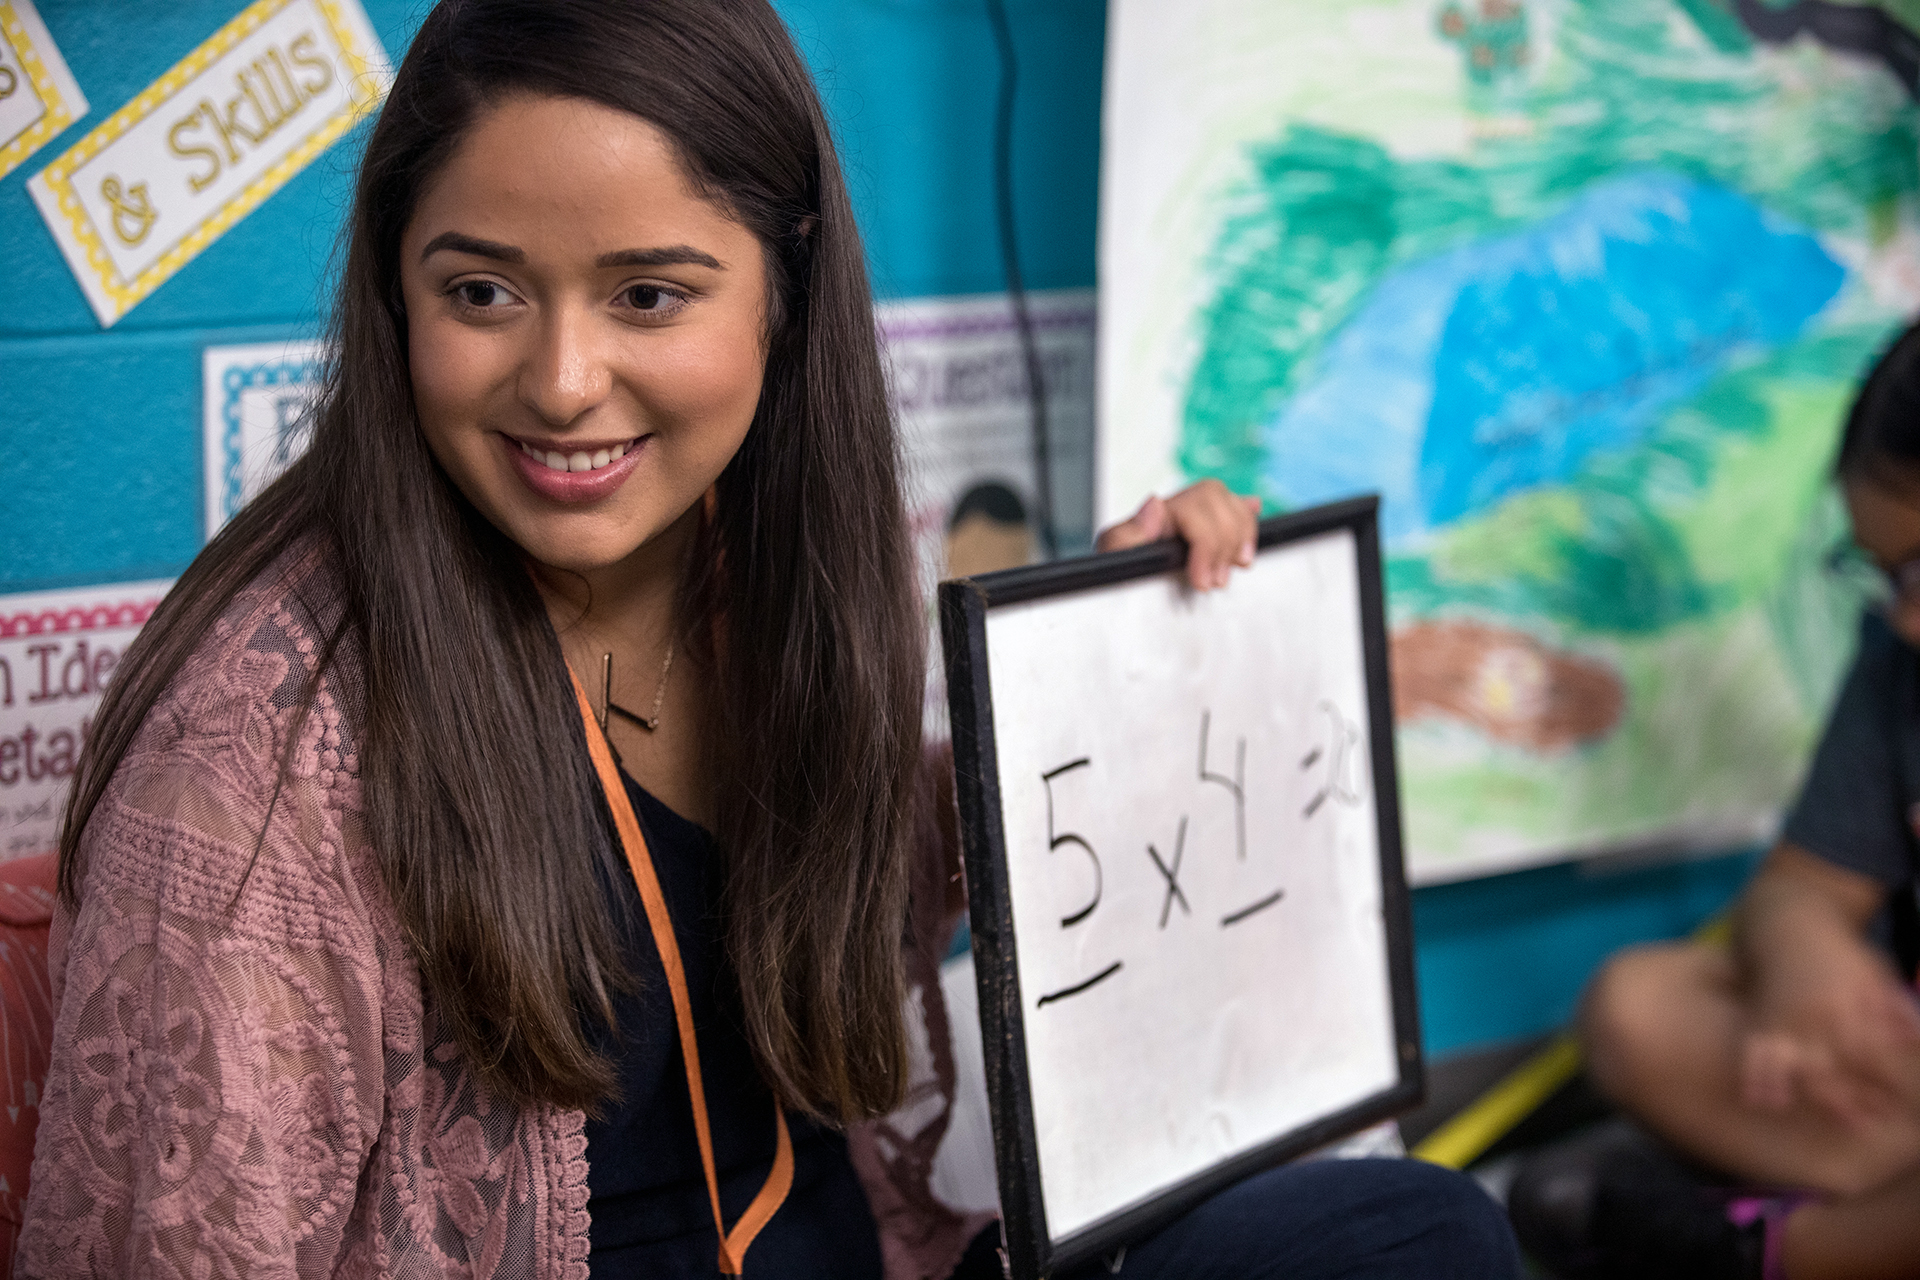 Image of student holding a white board in a classroom.